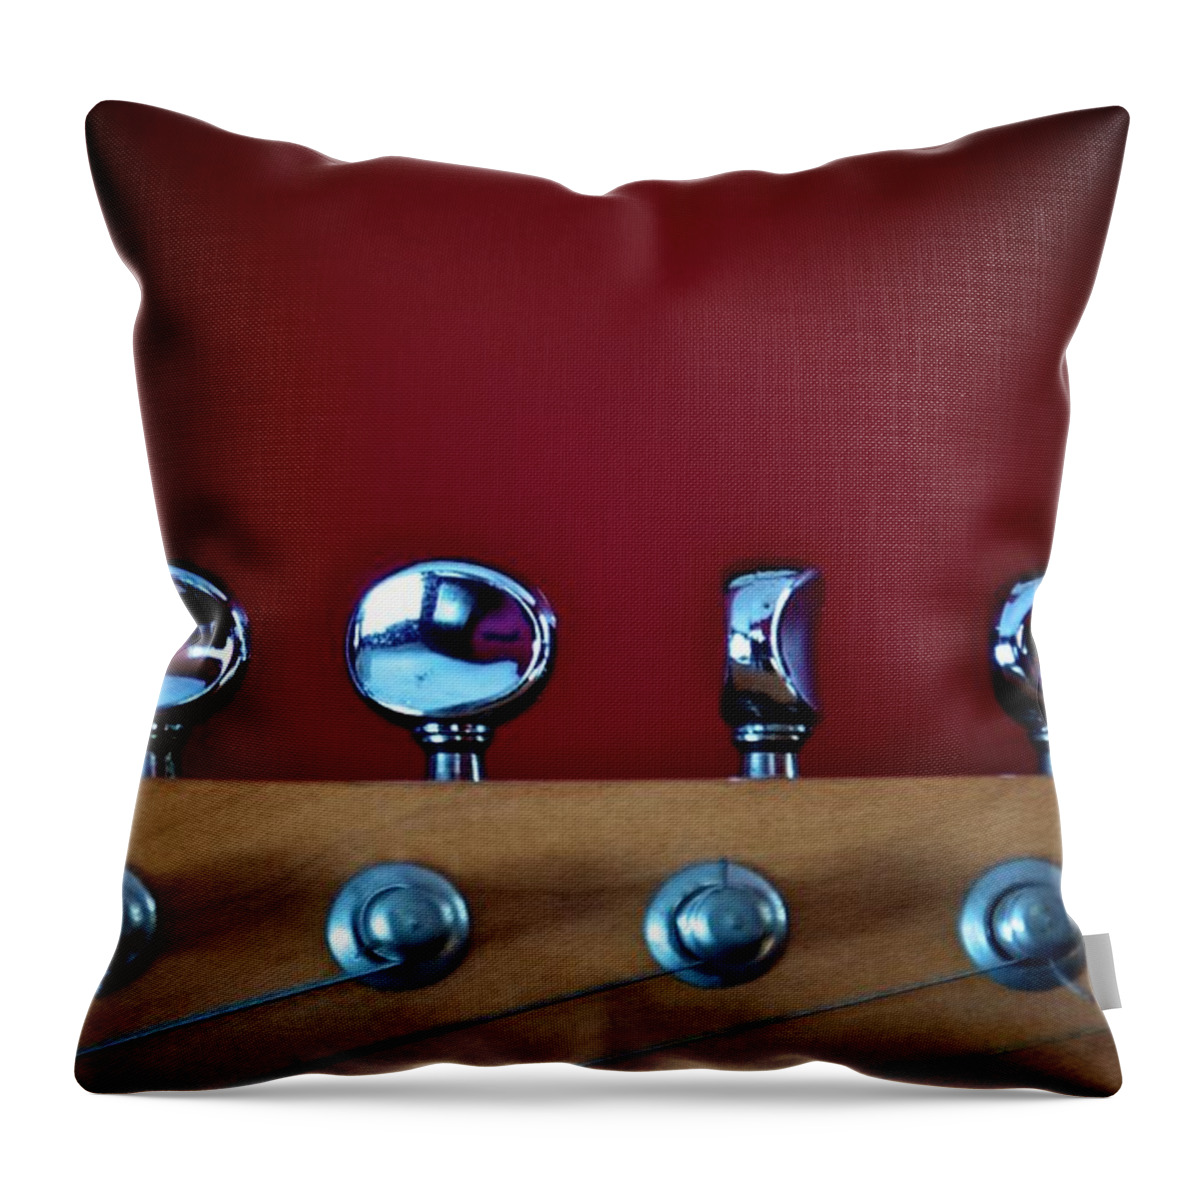 Music Throw Pillow featuring the photograph Guitar Tuning Pegs And Strings by Lynn.h.armstrong Photography